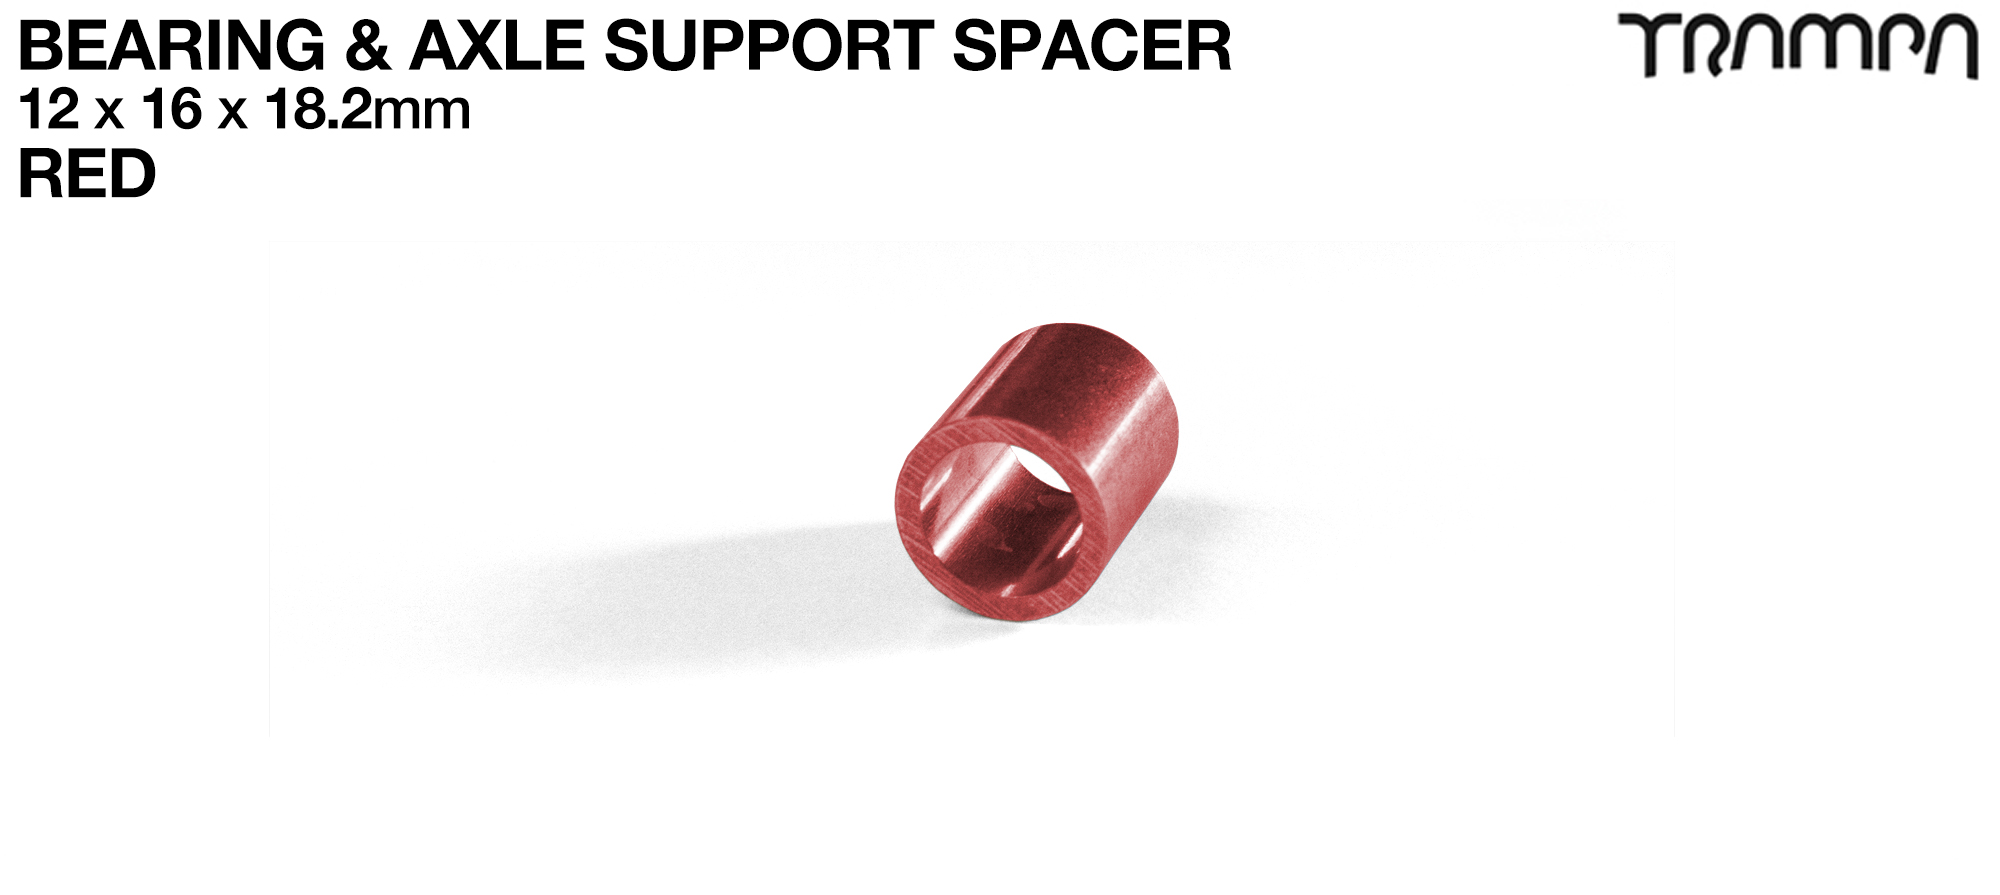 18.2mm Wheel Support Axle Spacers - RED 